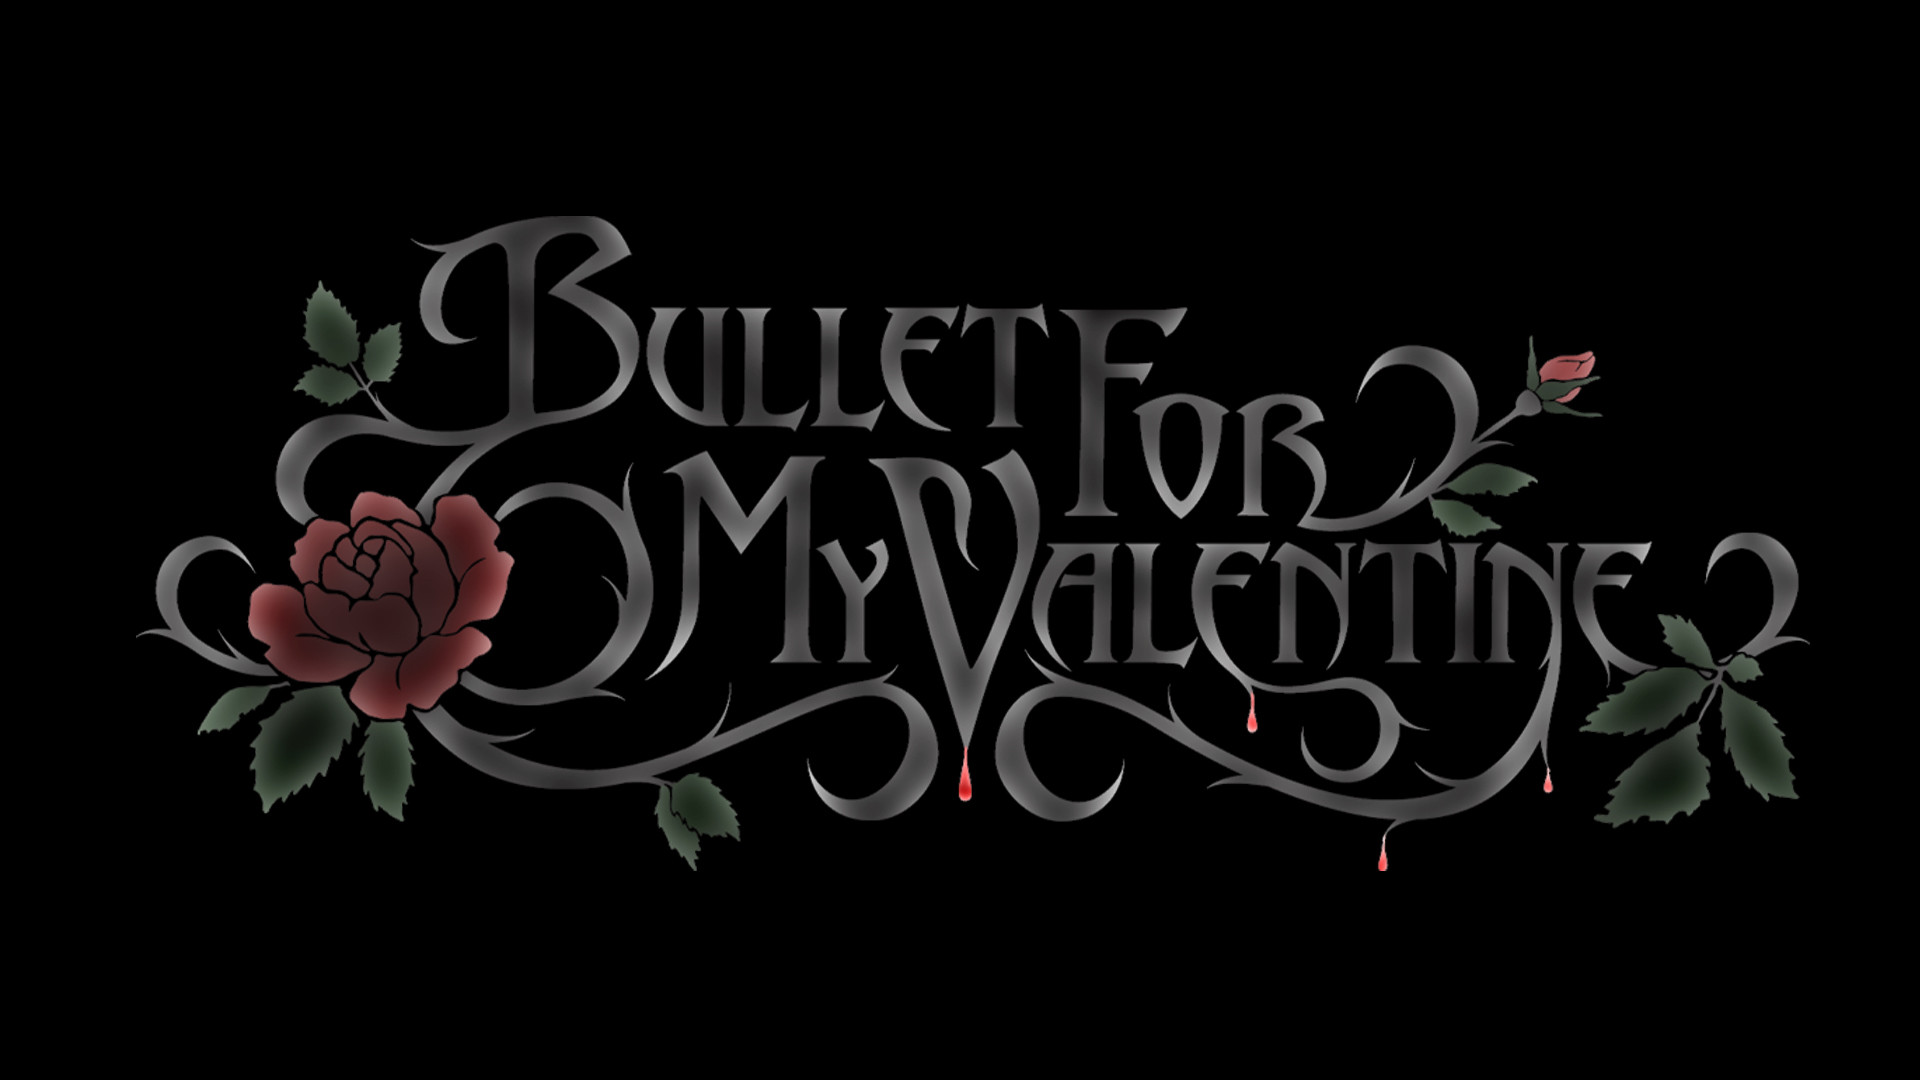 1920x1080 Bullet For My Valentine wallpapers hd Source Â· BFMV by JulianGreen1 on  DeviantArt